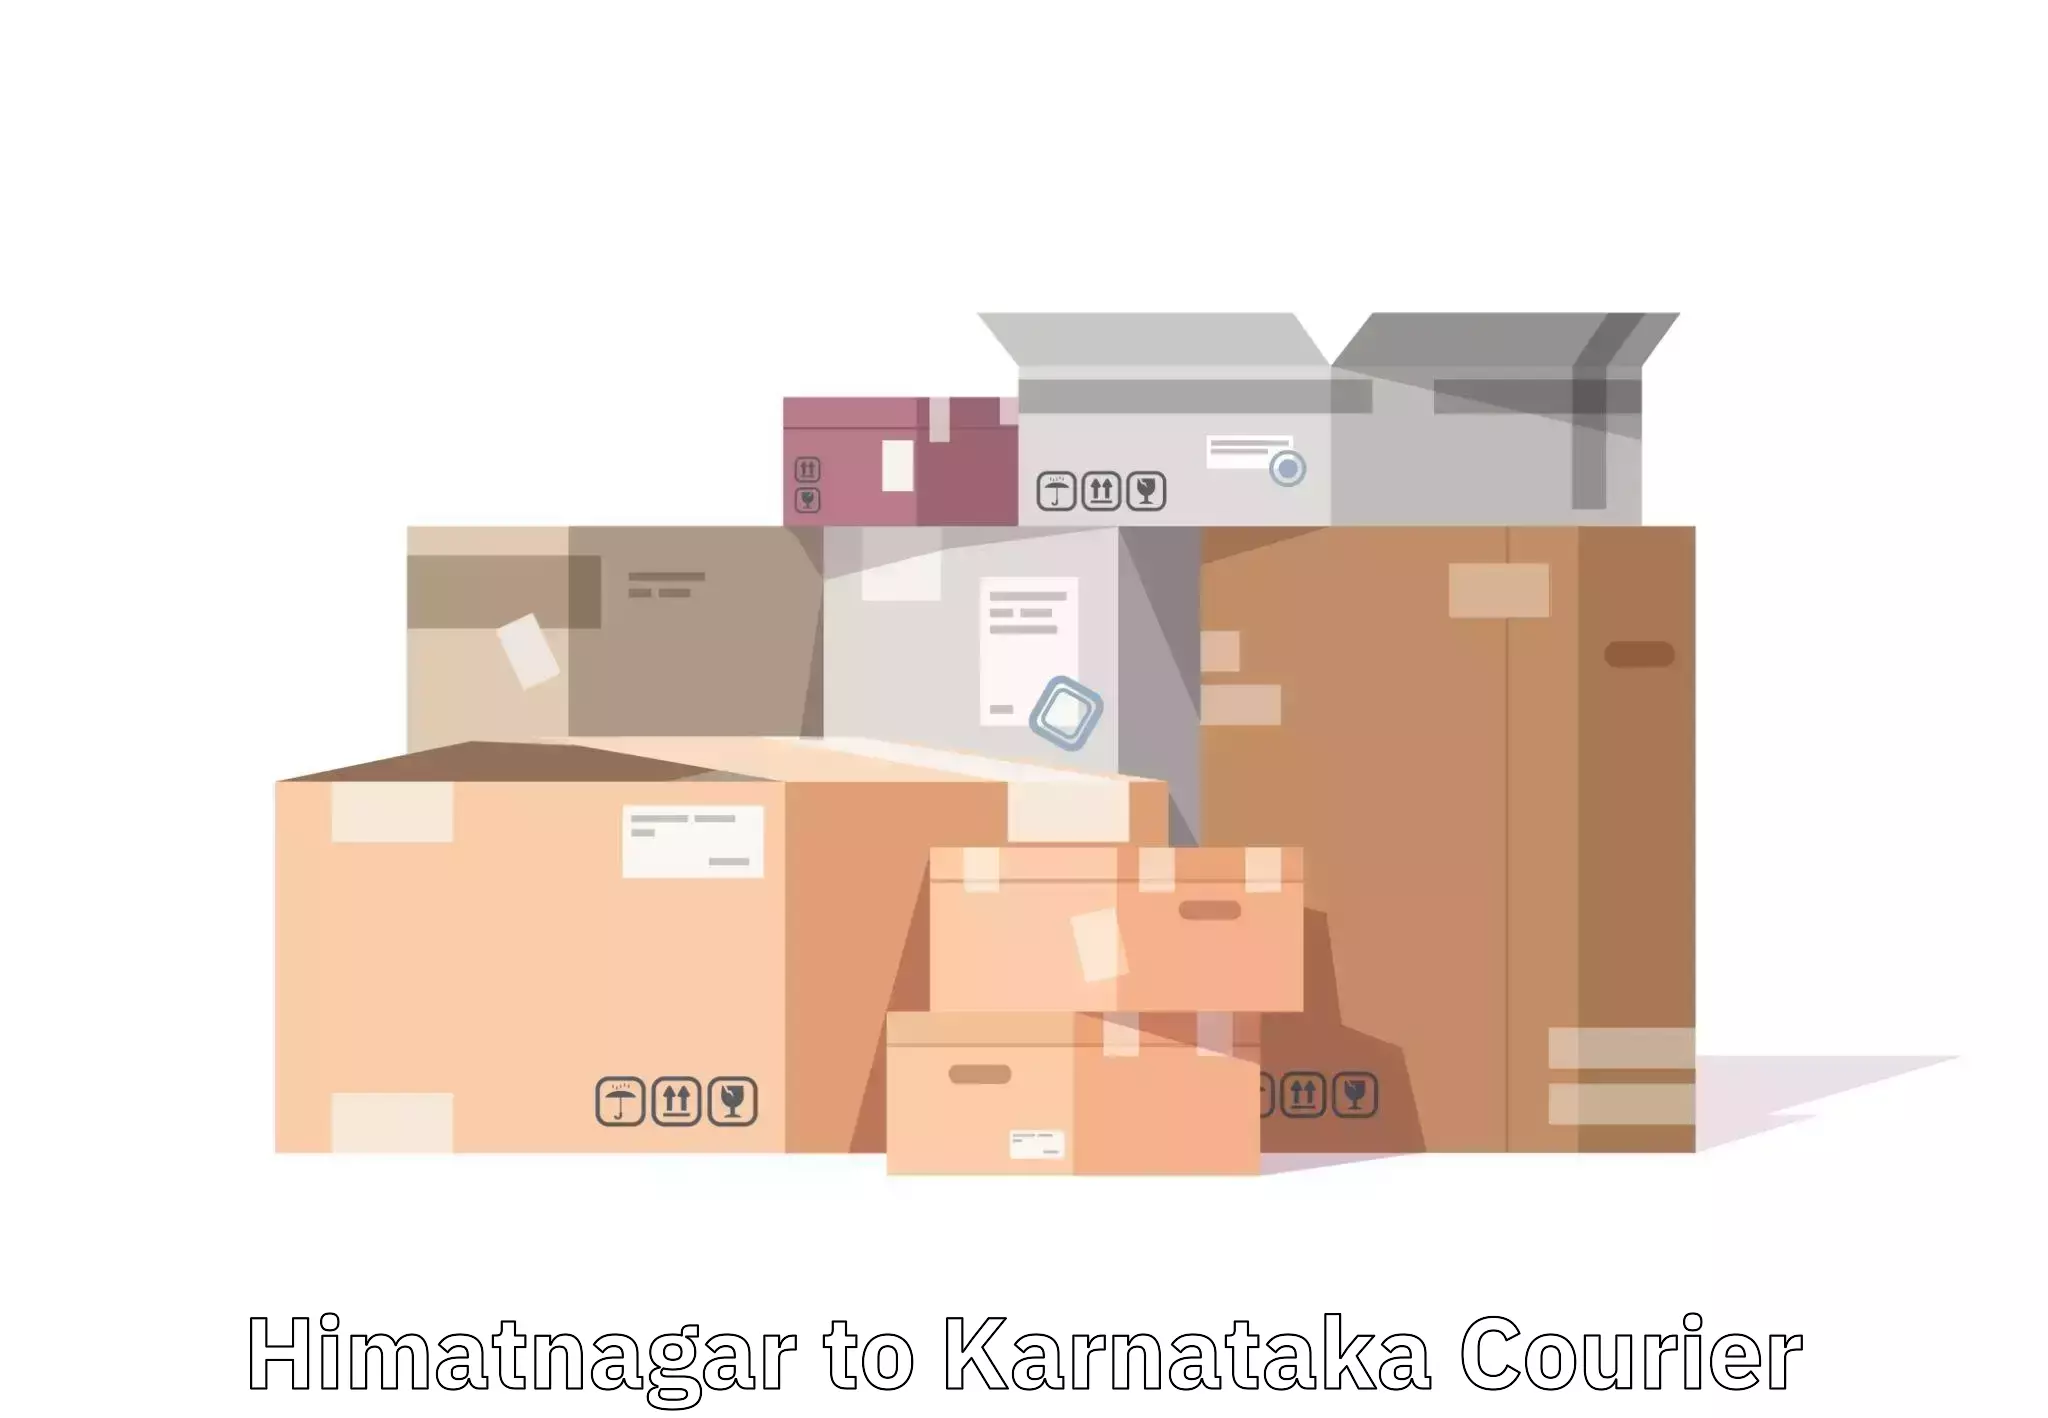 Luggage shipment specialists Himatnagar to Challakere